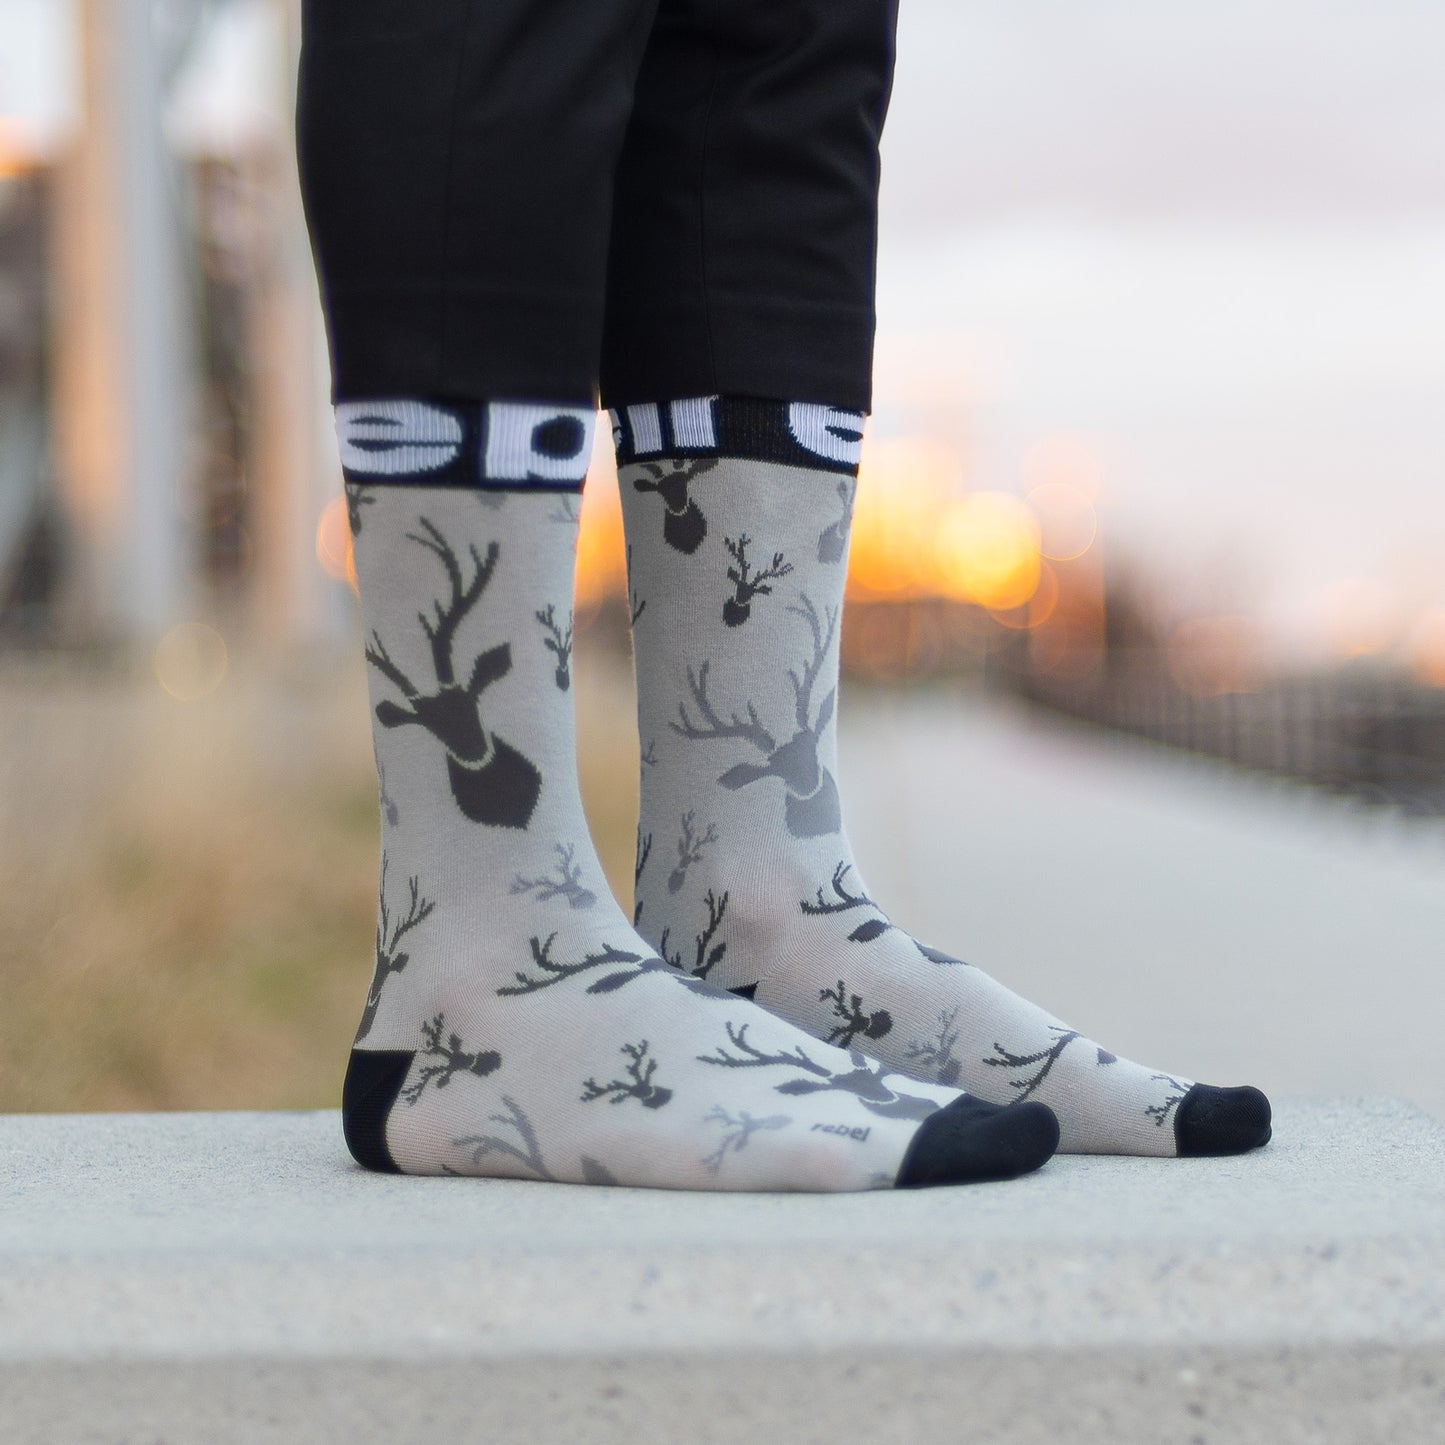 Make a statement with Rebel Fashion's Funky Deer Socks!